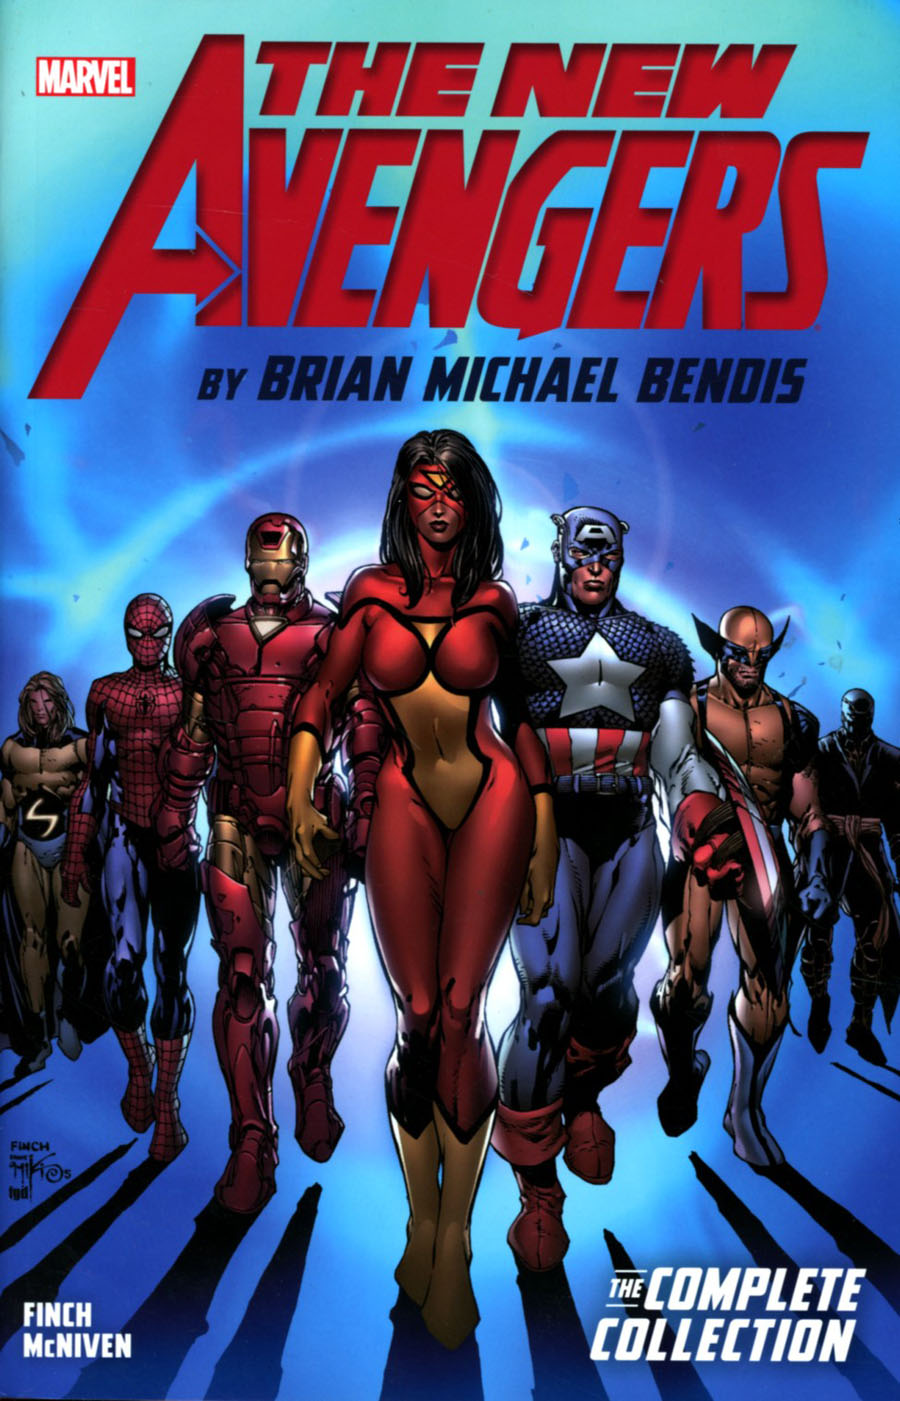 New Avengers By Brian Michael Bendis Complete Collection Vol 1 TP